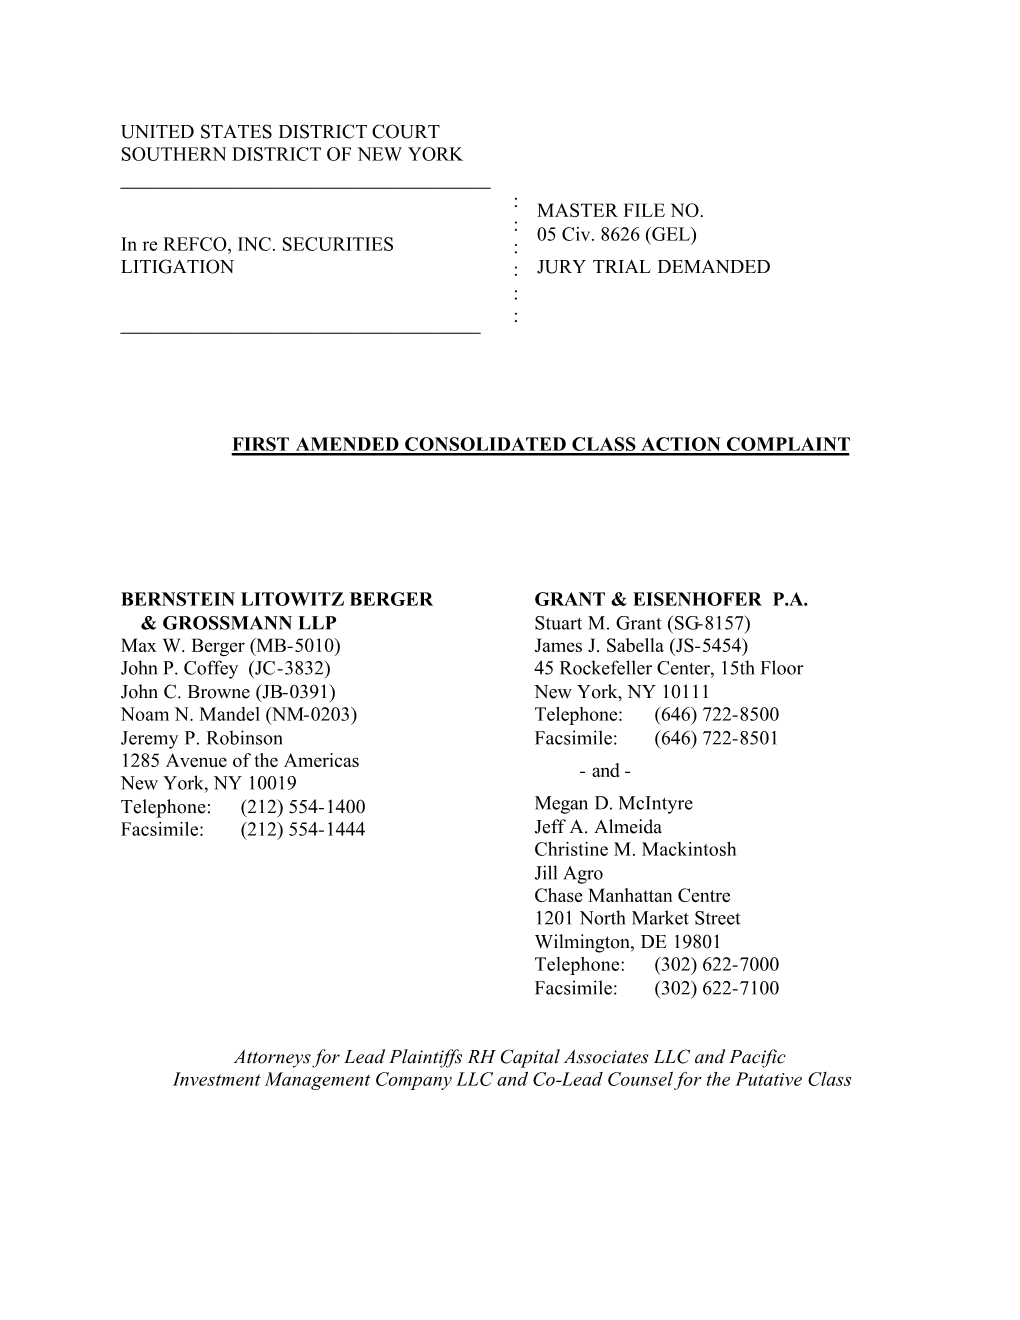 Refco, Inc. Securities Litigation 05-CV-8626-First Amended